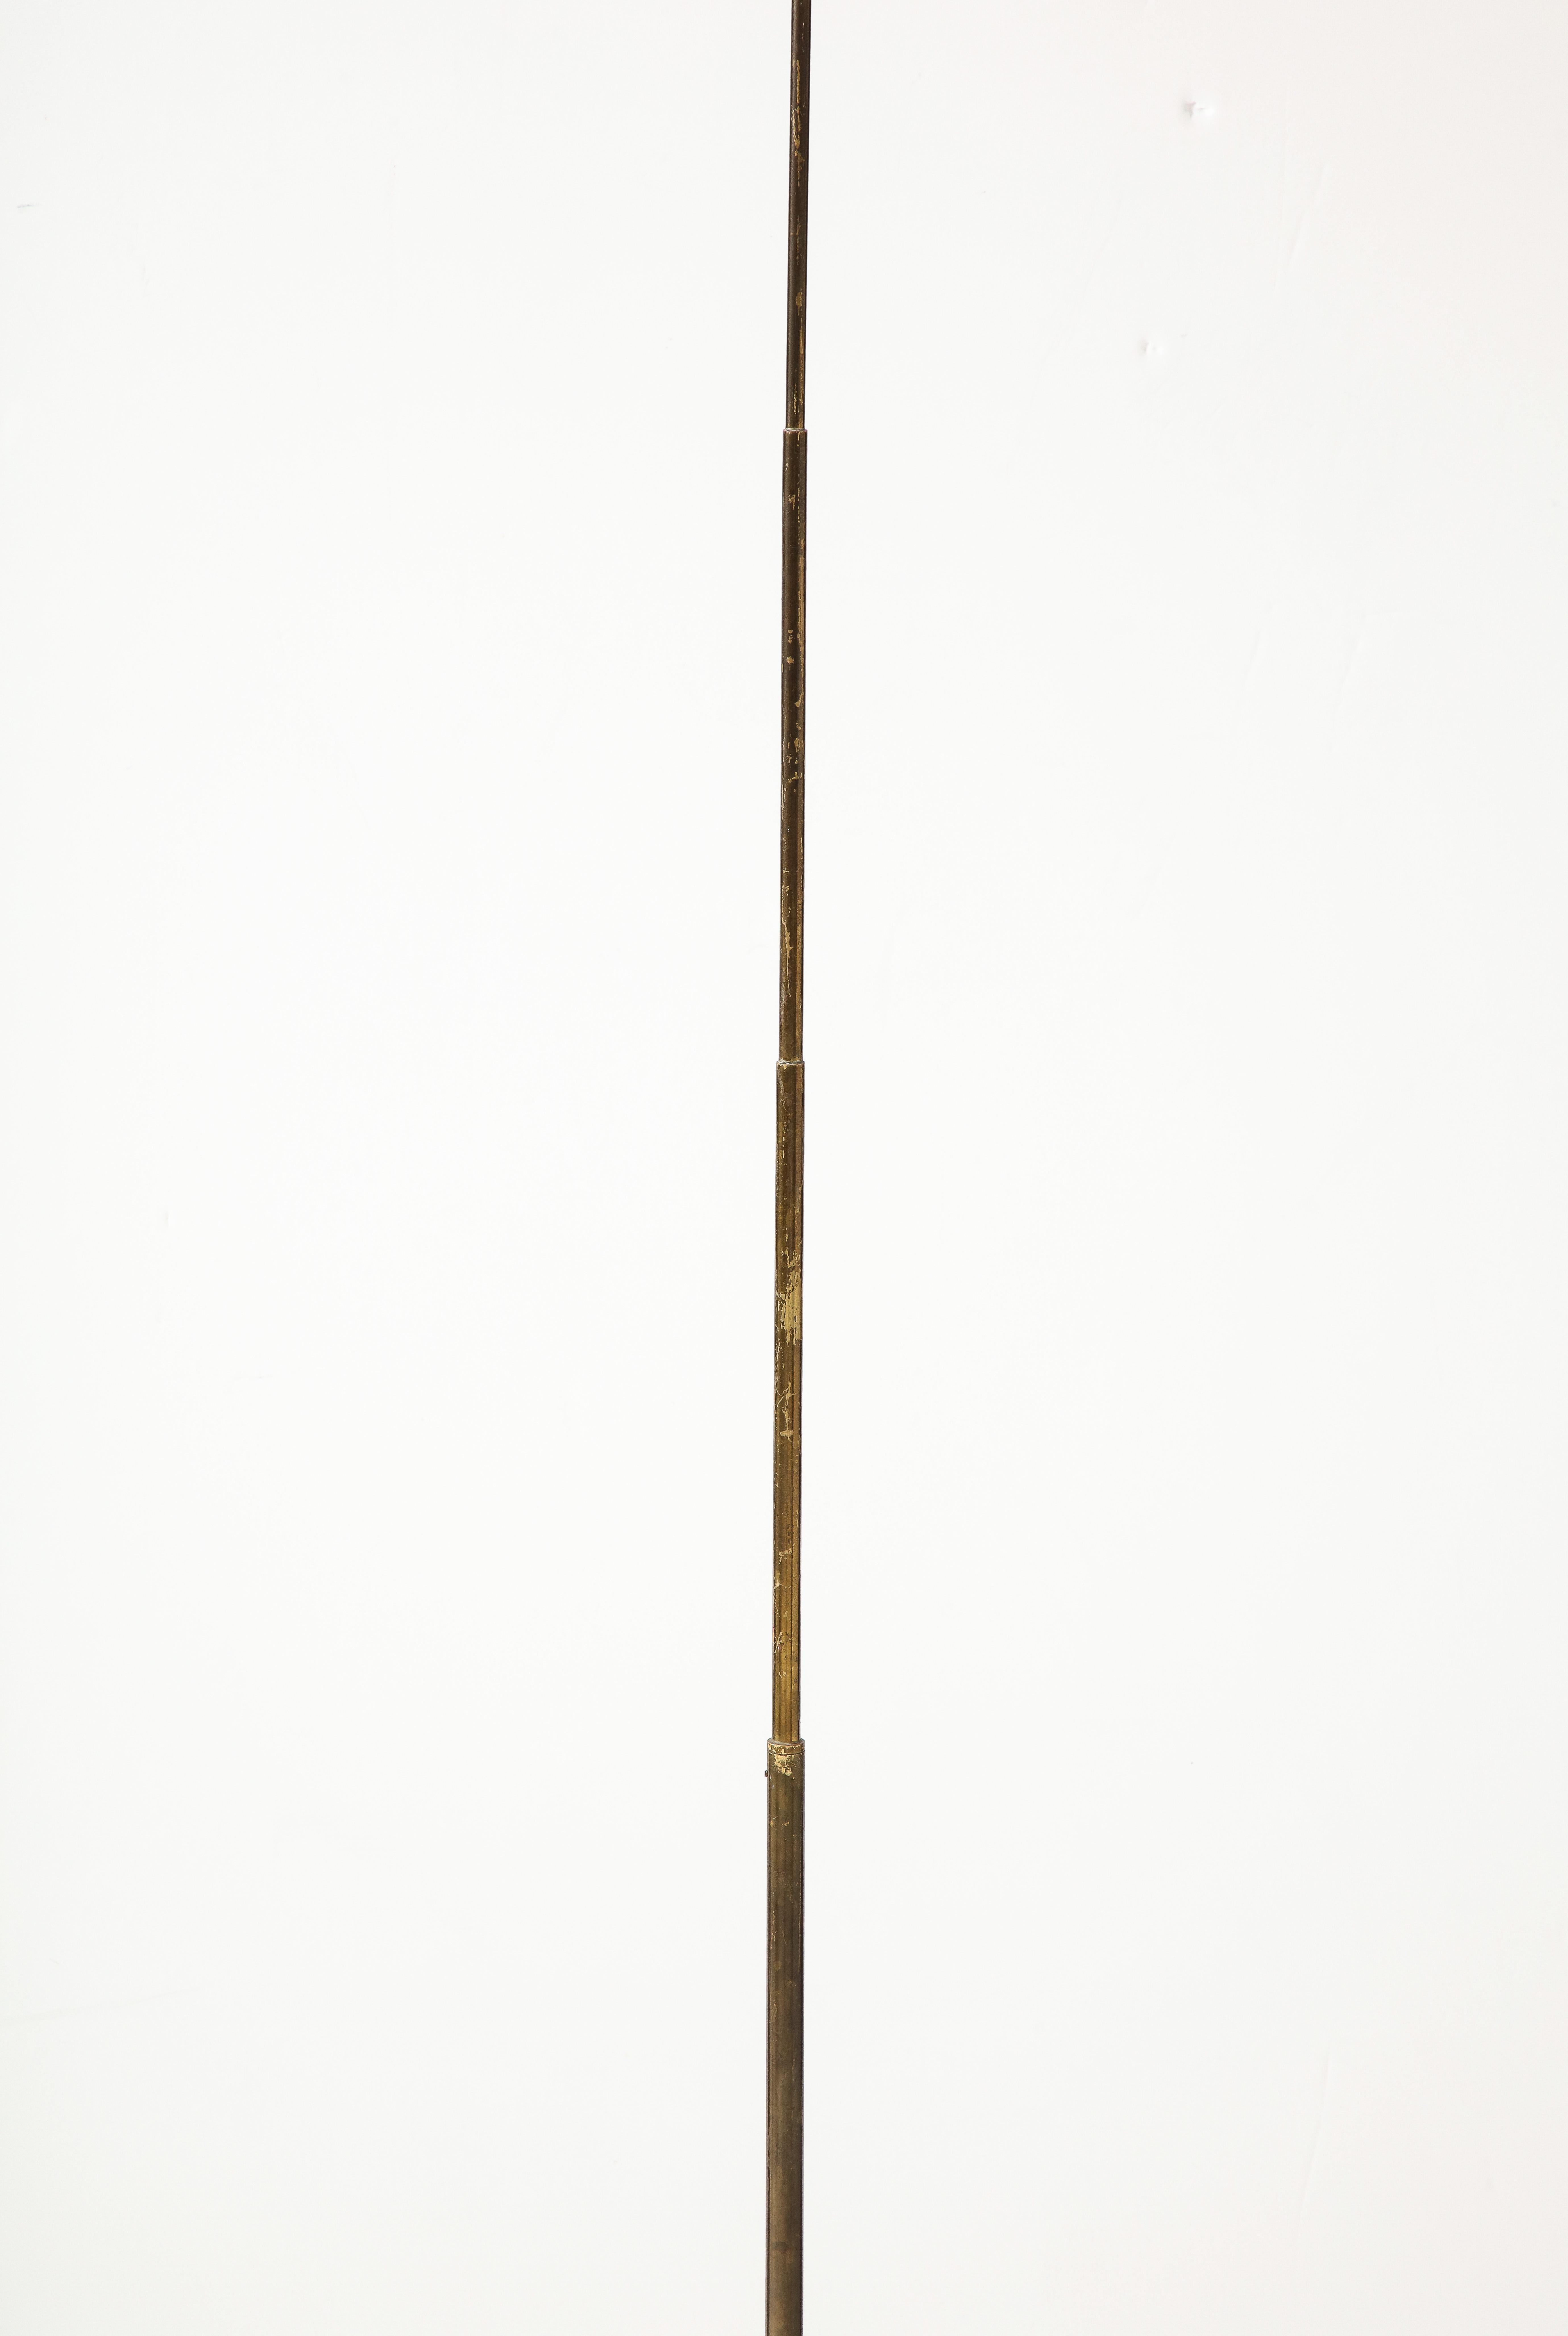 Modernist Gilt Bronze Floor Lamp with Copper Accents, Italy, 1980s For Sale 8